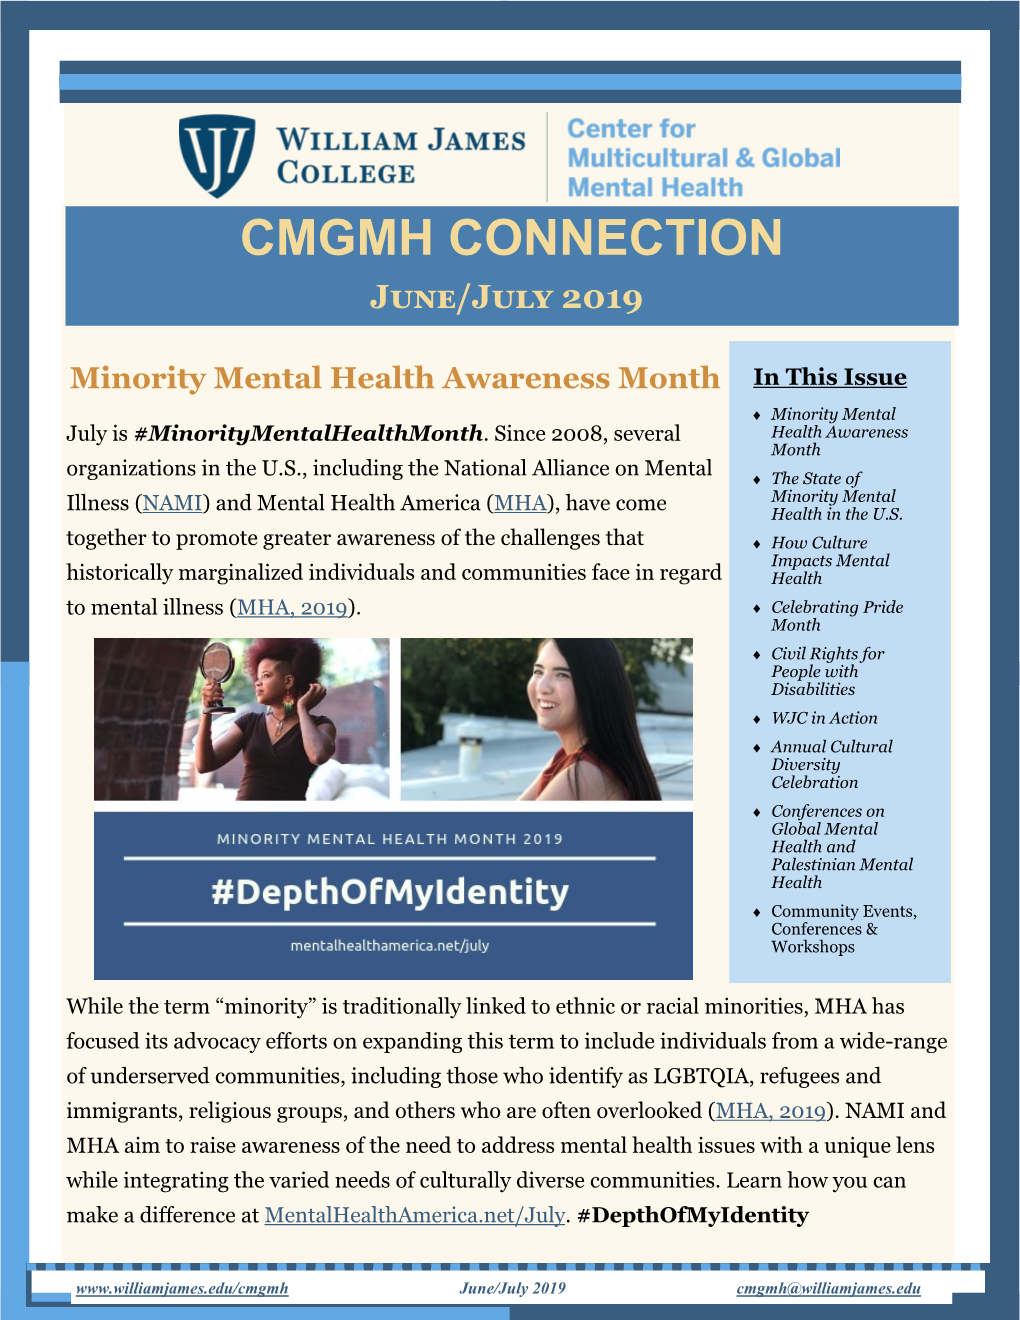 CMGMH CONNECTION June/July 2019